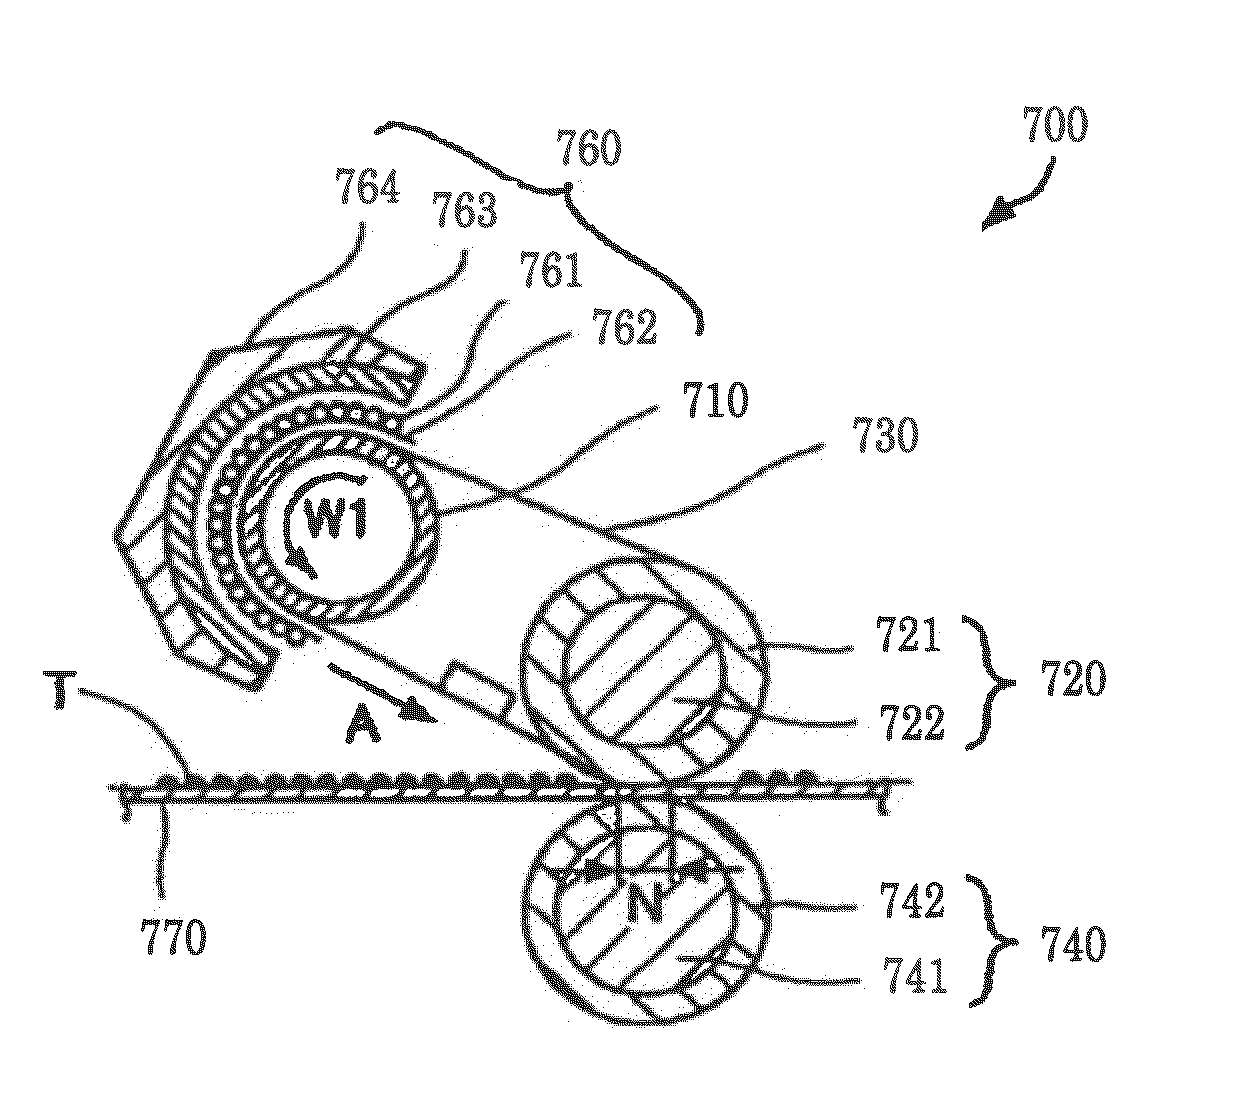 Toner, image forming method using the toner, and image forming apparatus using the toner